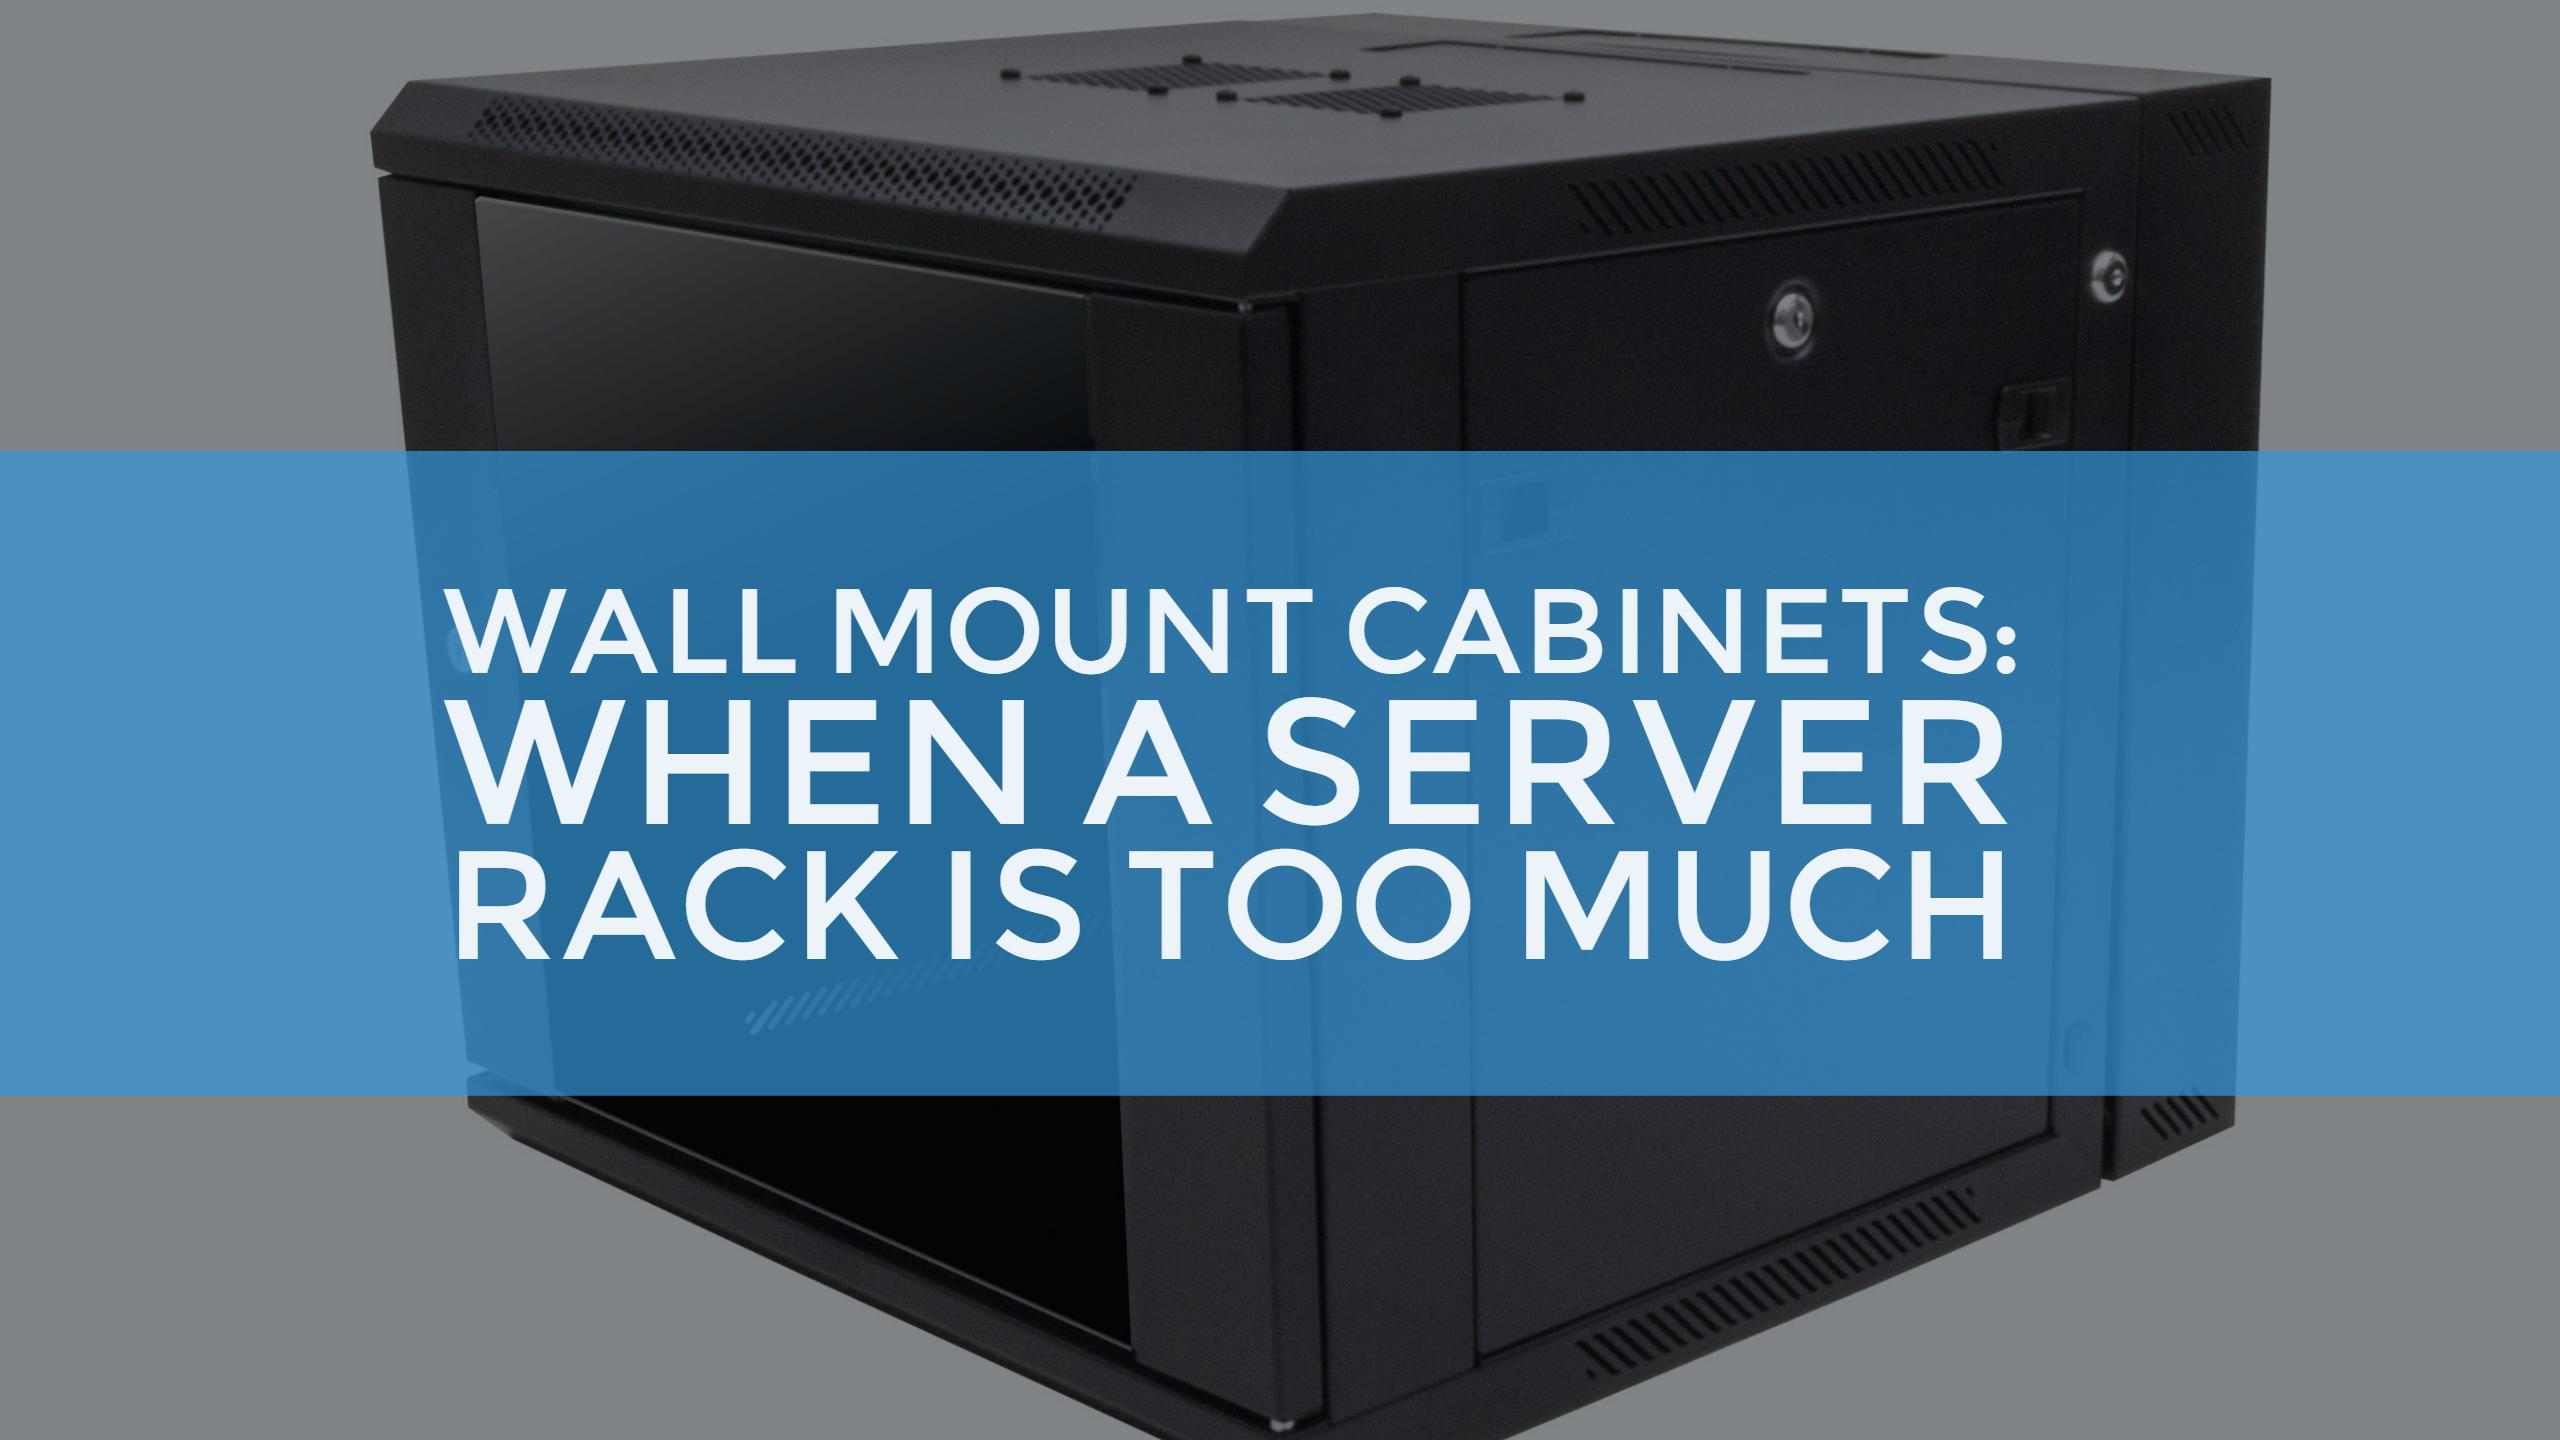 Wall Mount Cabinets: When A Server Rack is Too Much